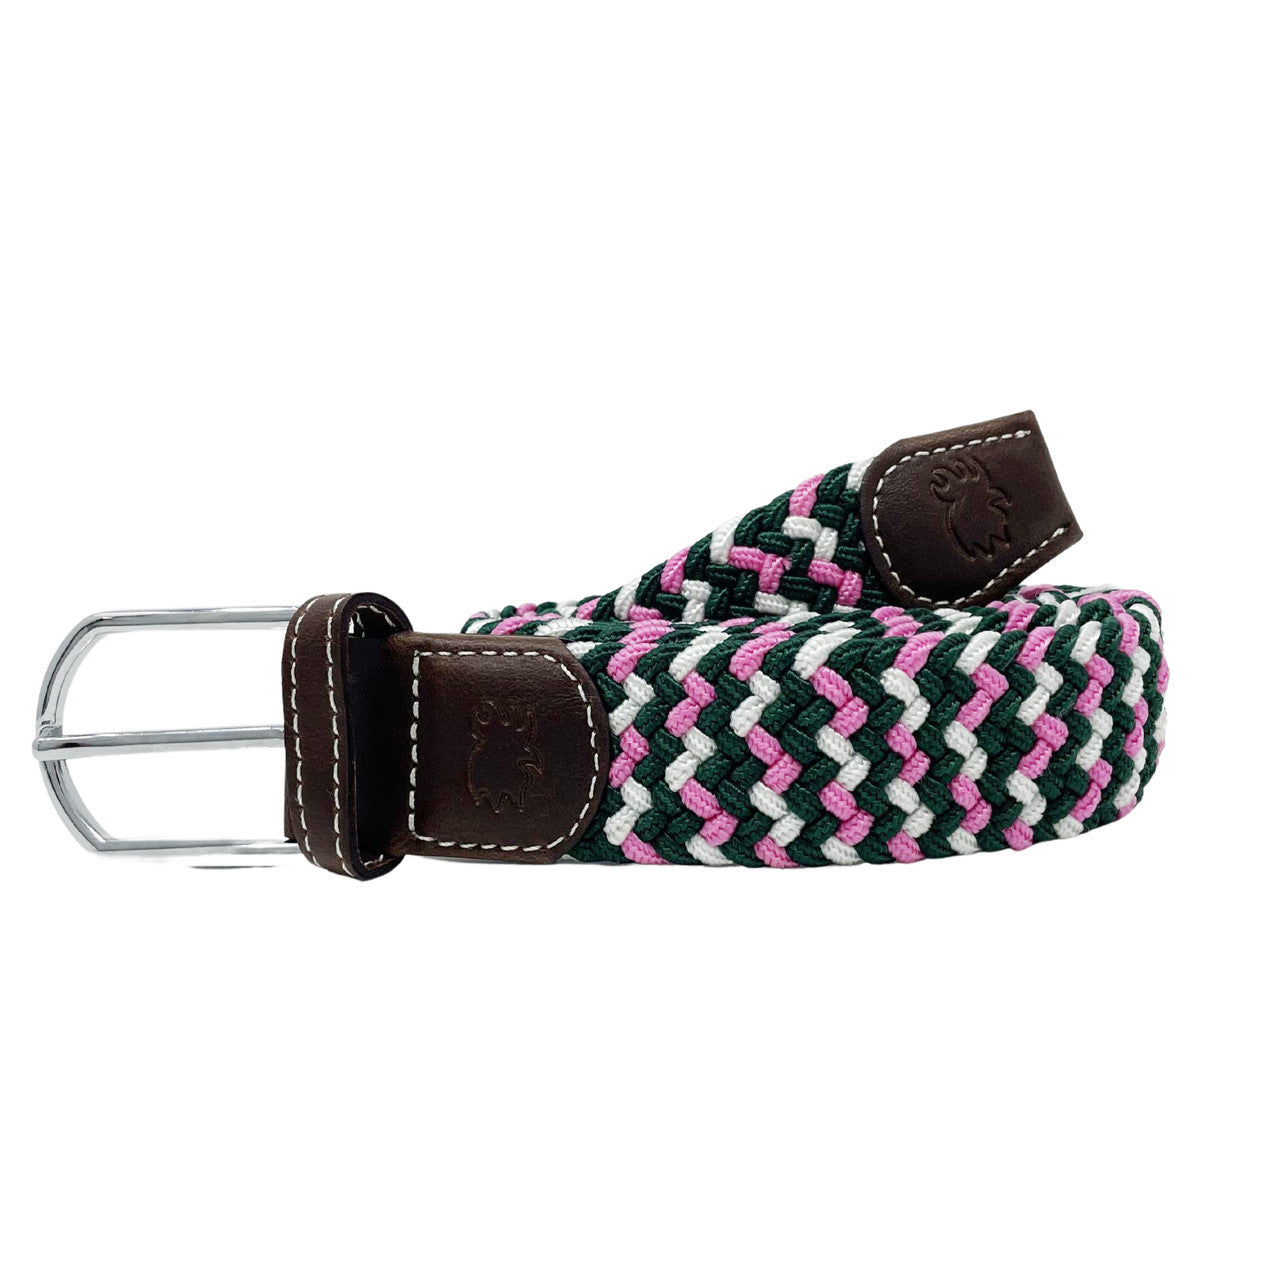 Roostas -The Tradition Woven Elastic Stretch Belt